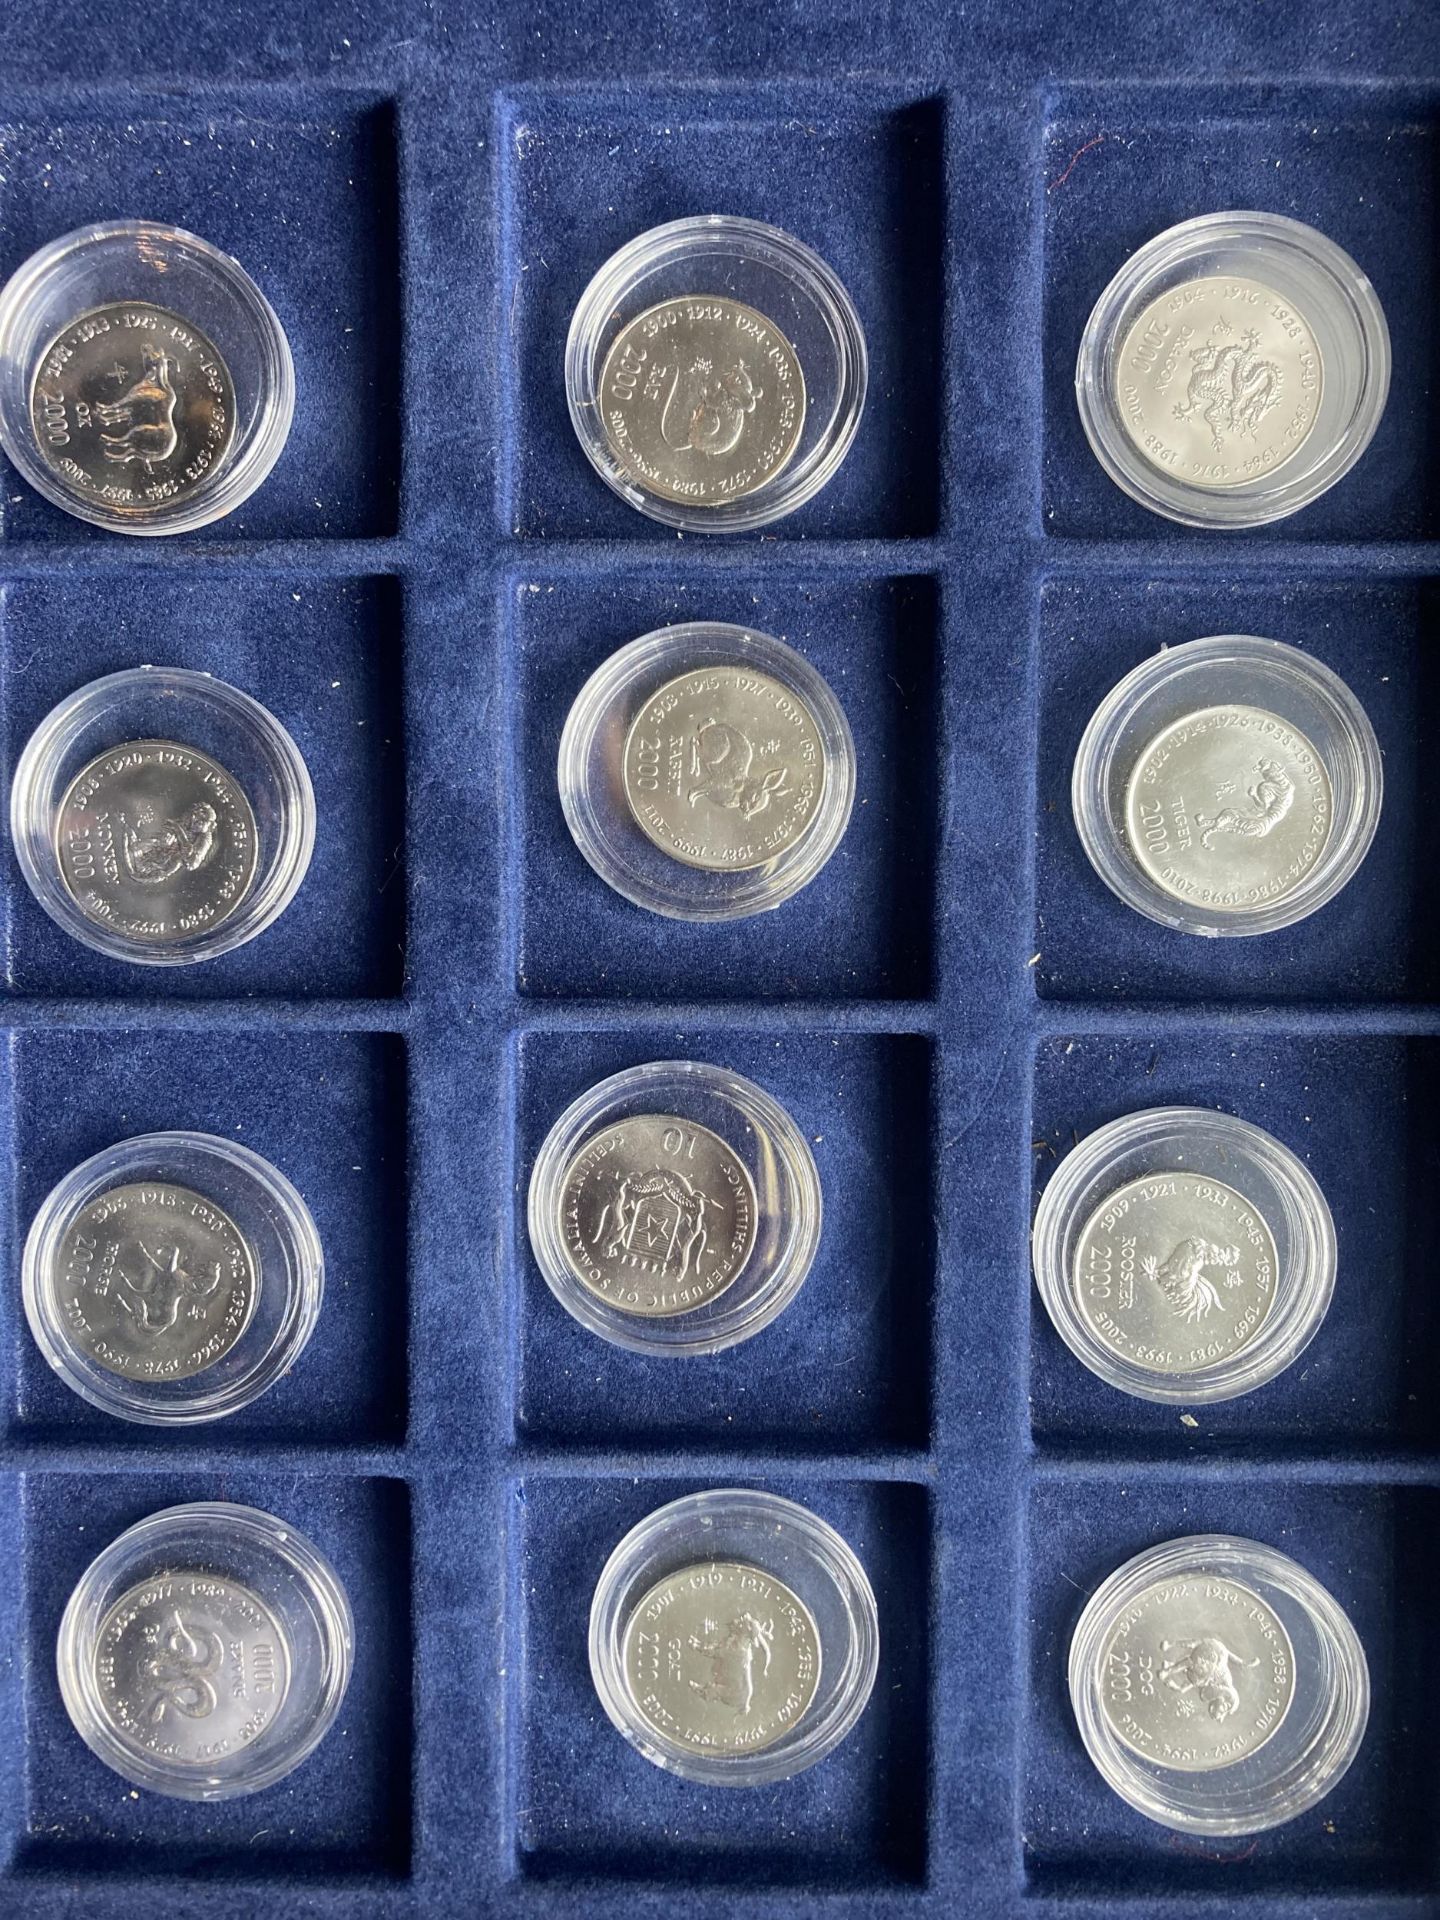 SOMALIA , A SELECTION OF 12 ENCAPSULATED TEN SHILLING COINS FROM 2000